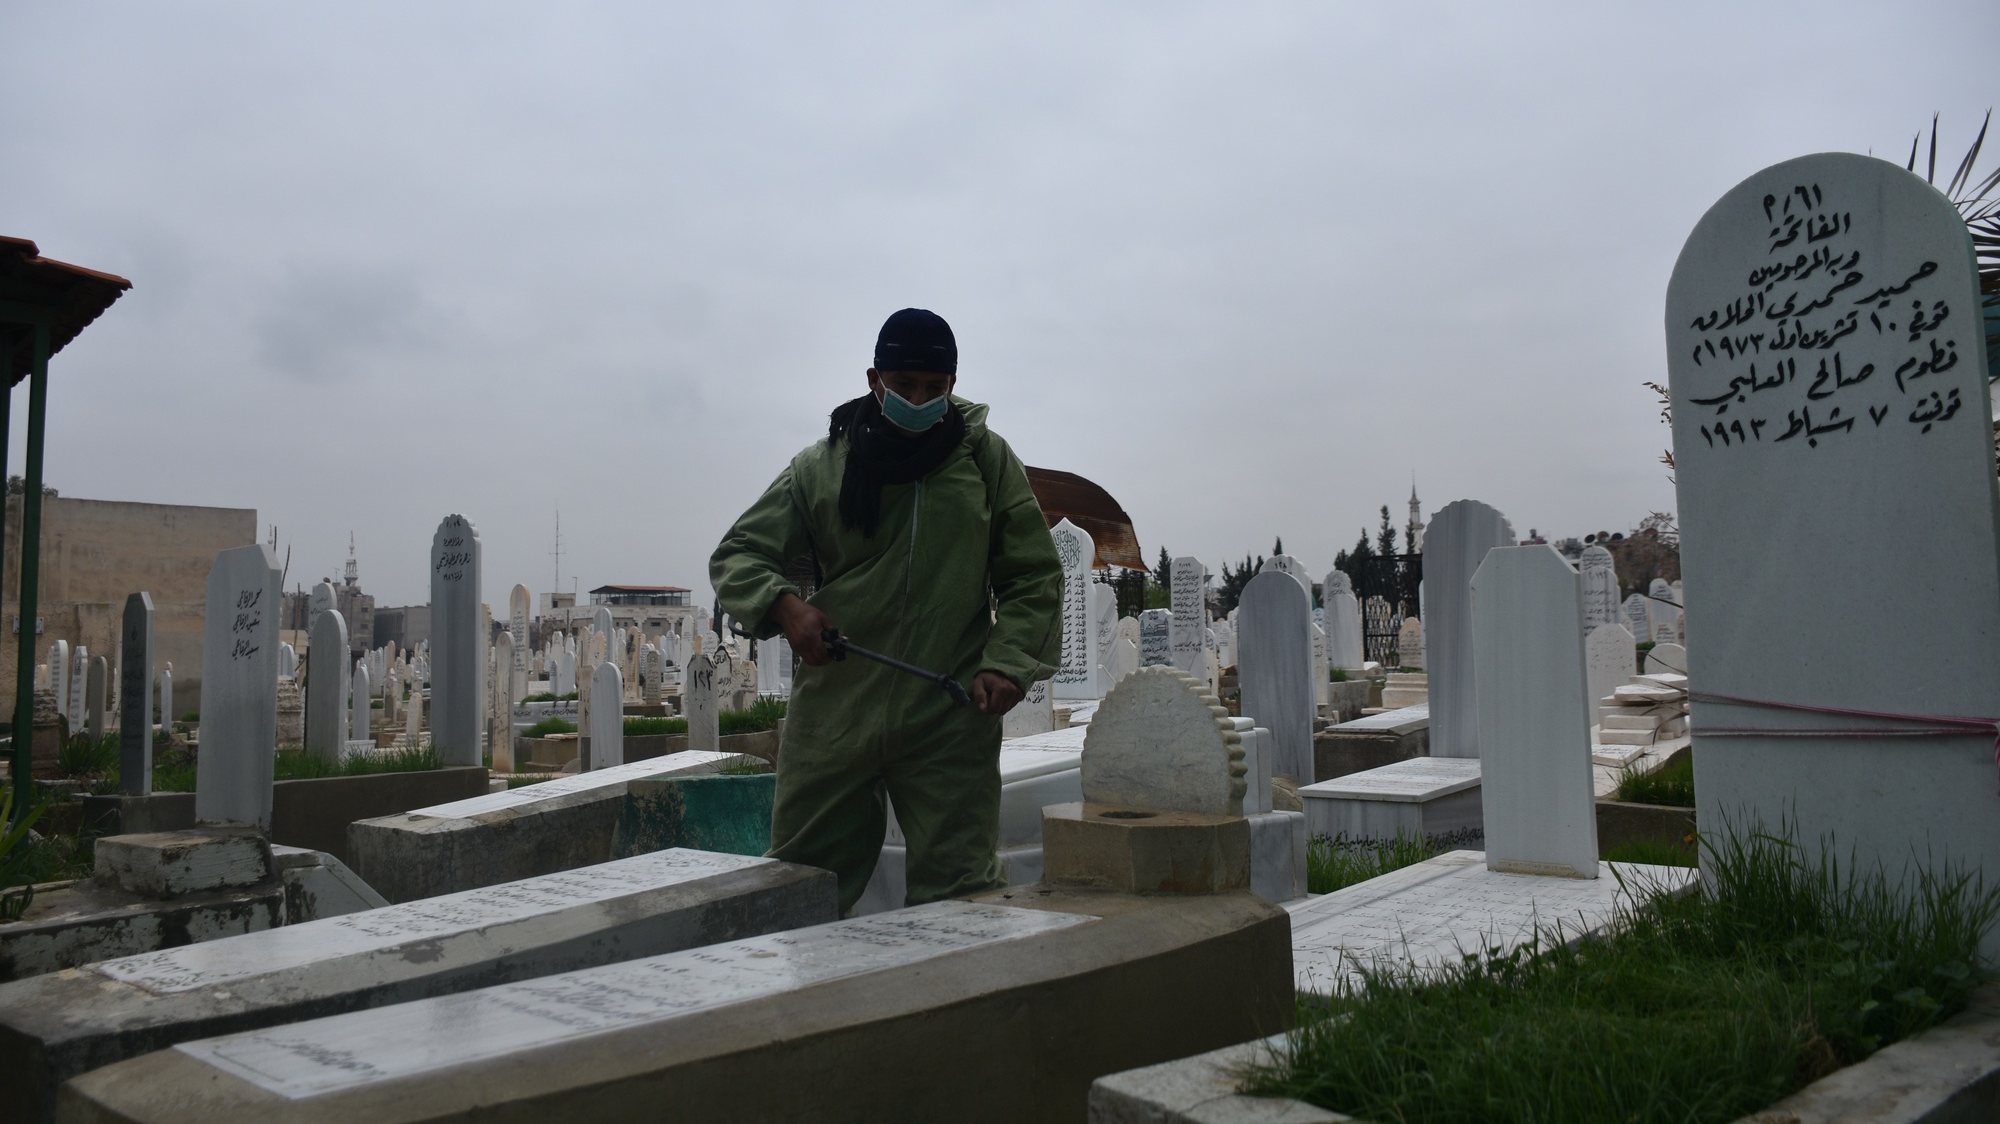 epa08908954 Workers of the Syrian municipality department sterilize tombs in a cemetery in Damascus, Syria, on 29 December 2020. The campaign is part of the governmentâ€™s efforts to prevent further spreading of COVID-19.  EPA/YOUSSEF BADAWI